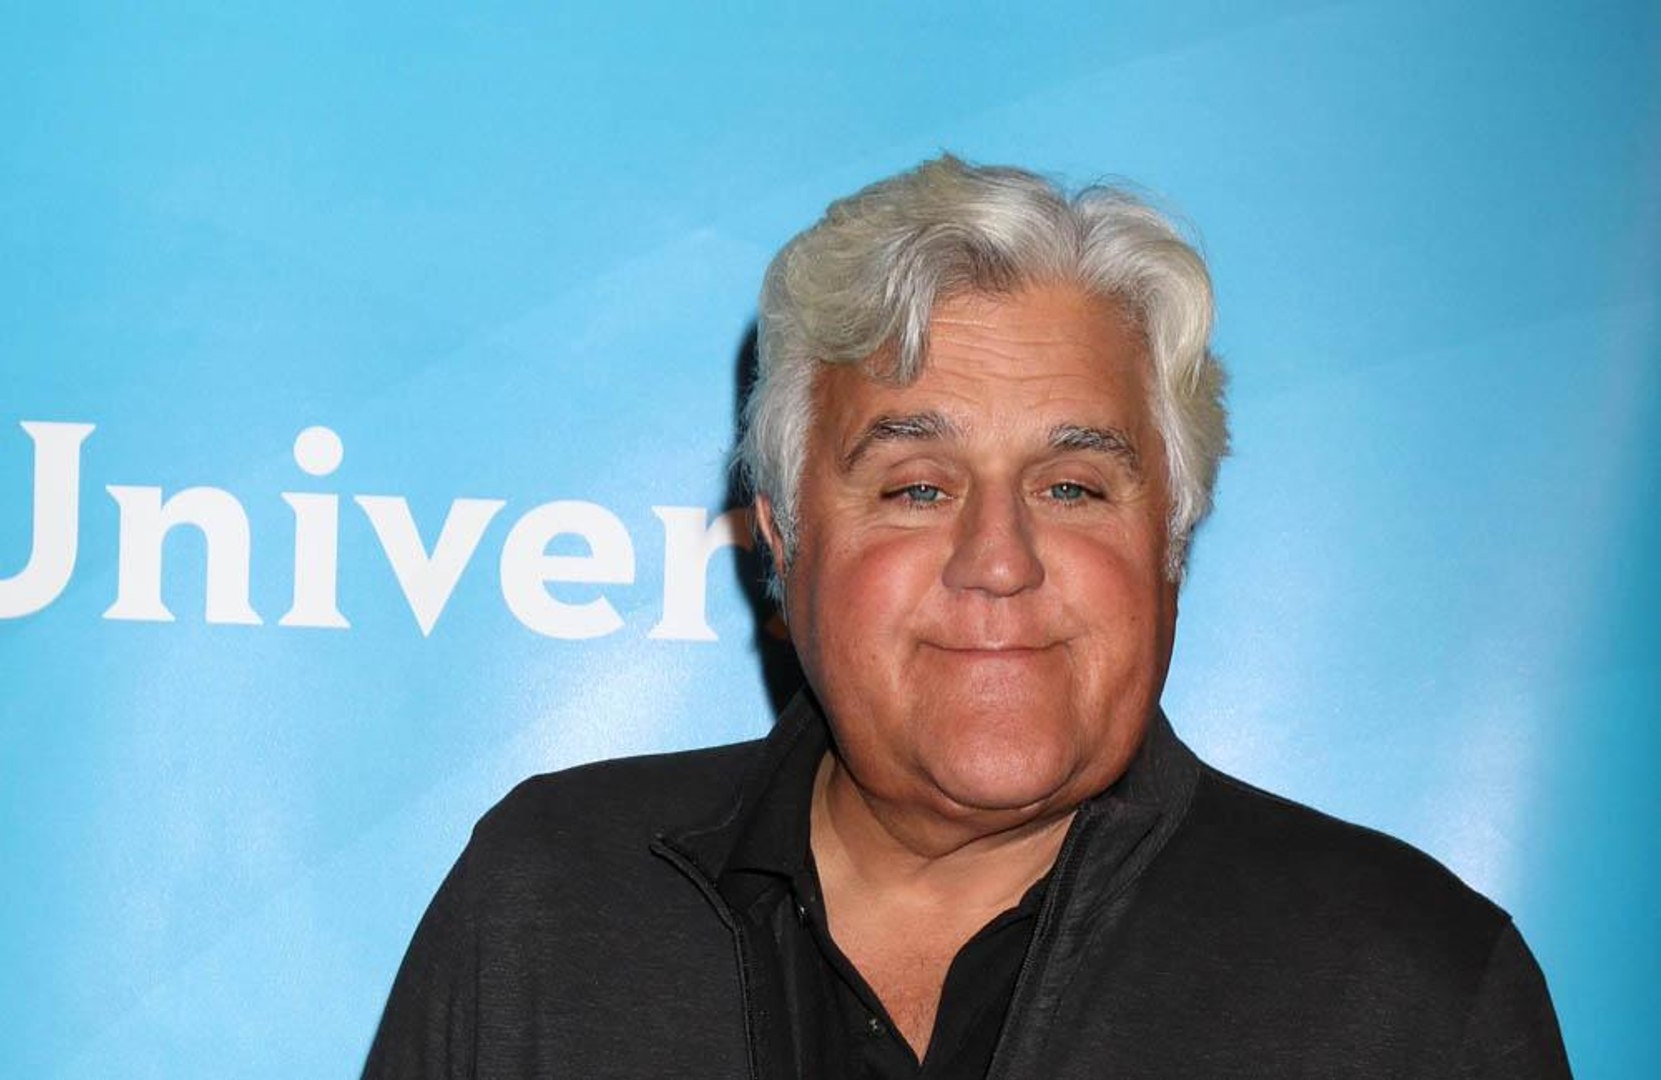 Jay Leno 'fully supports' his friend Ellen DeGeneres - video Dailymotion